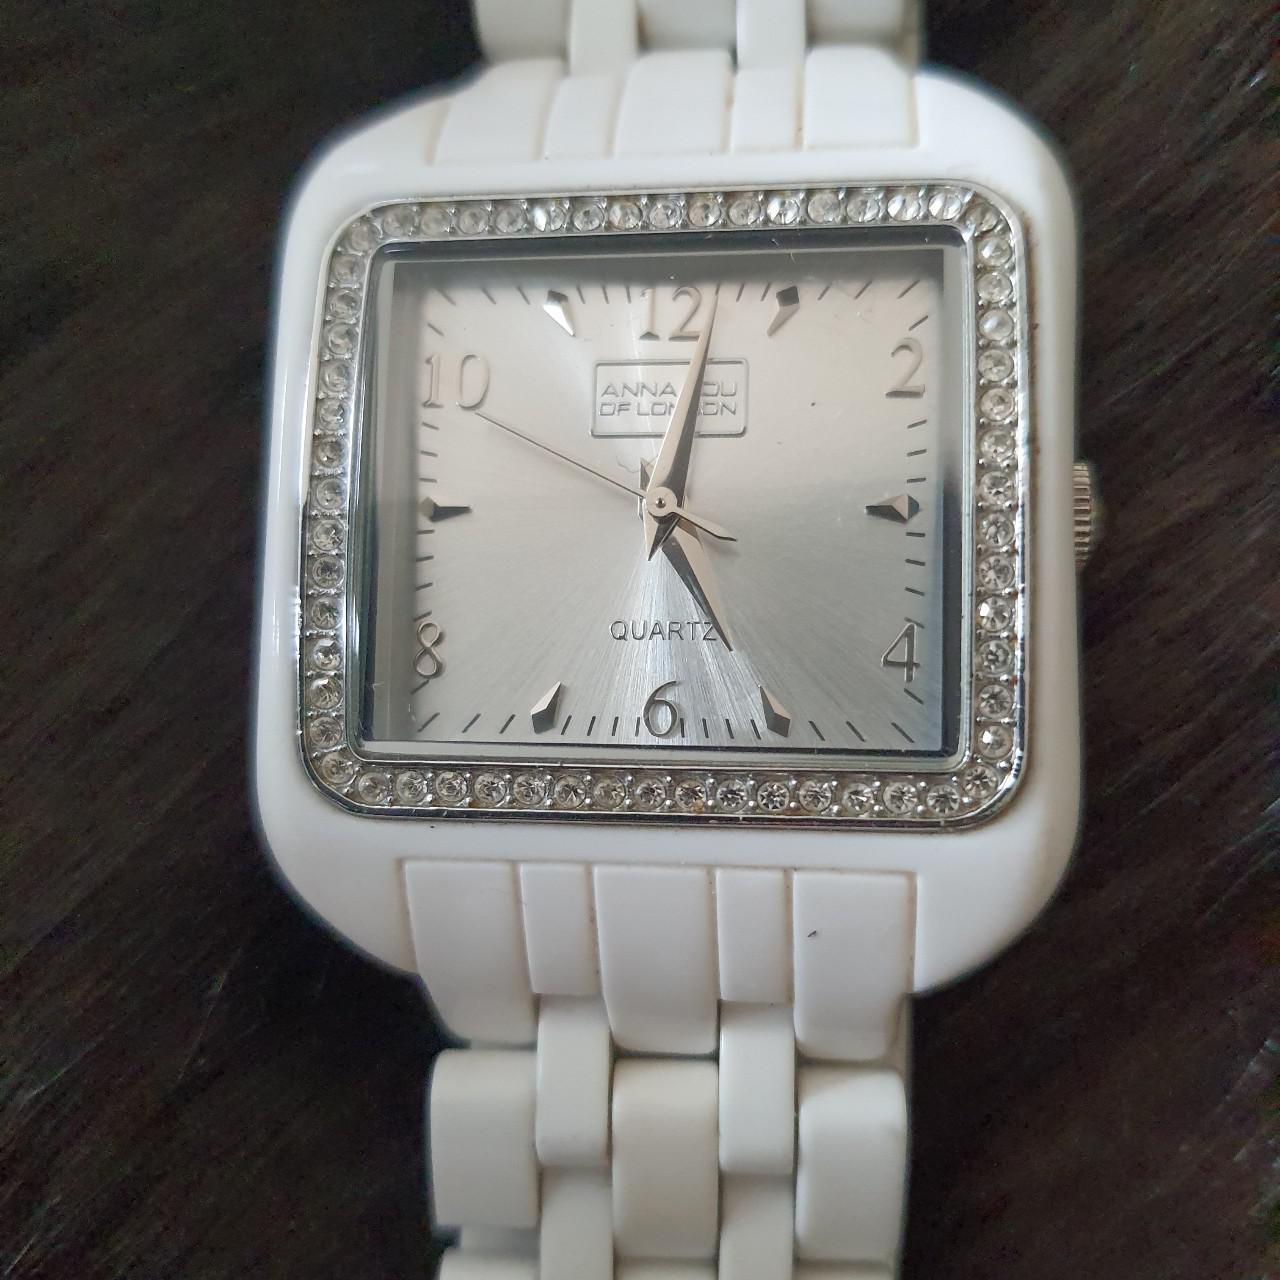 Product Image 1 - ANNA lou London white watch.
Needs